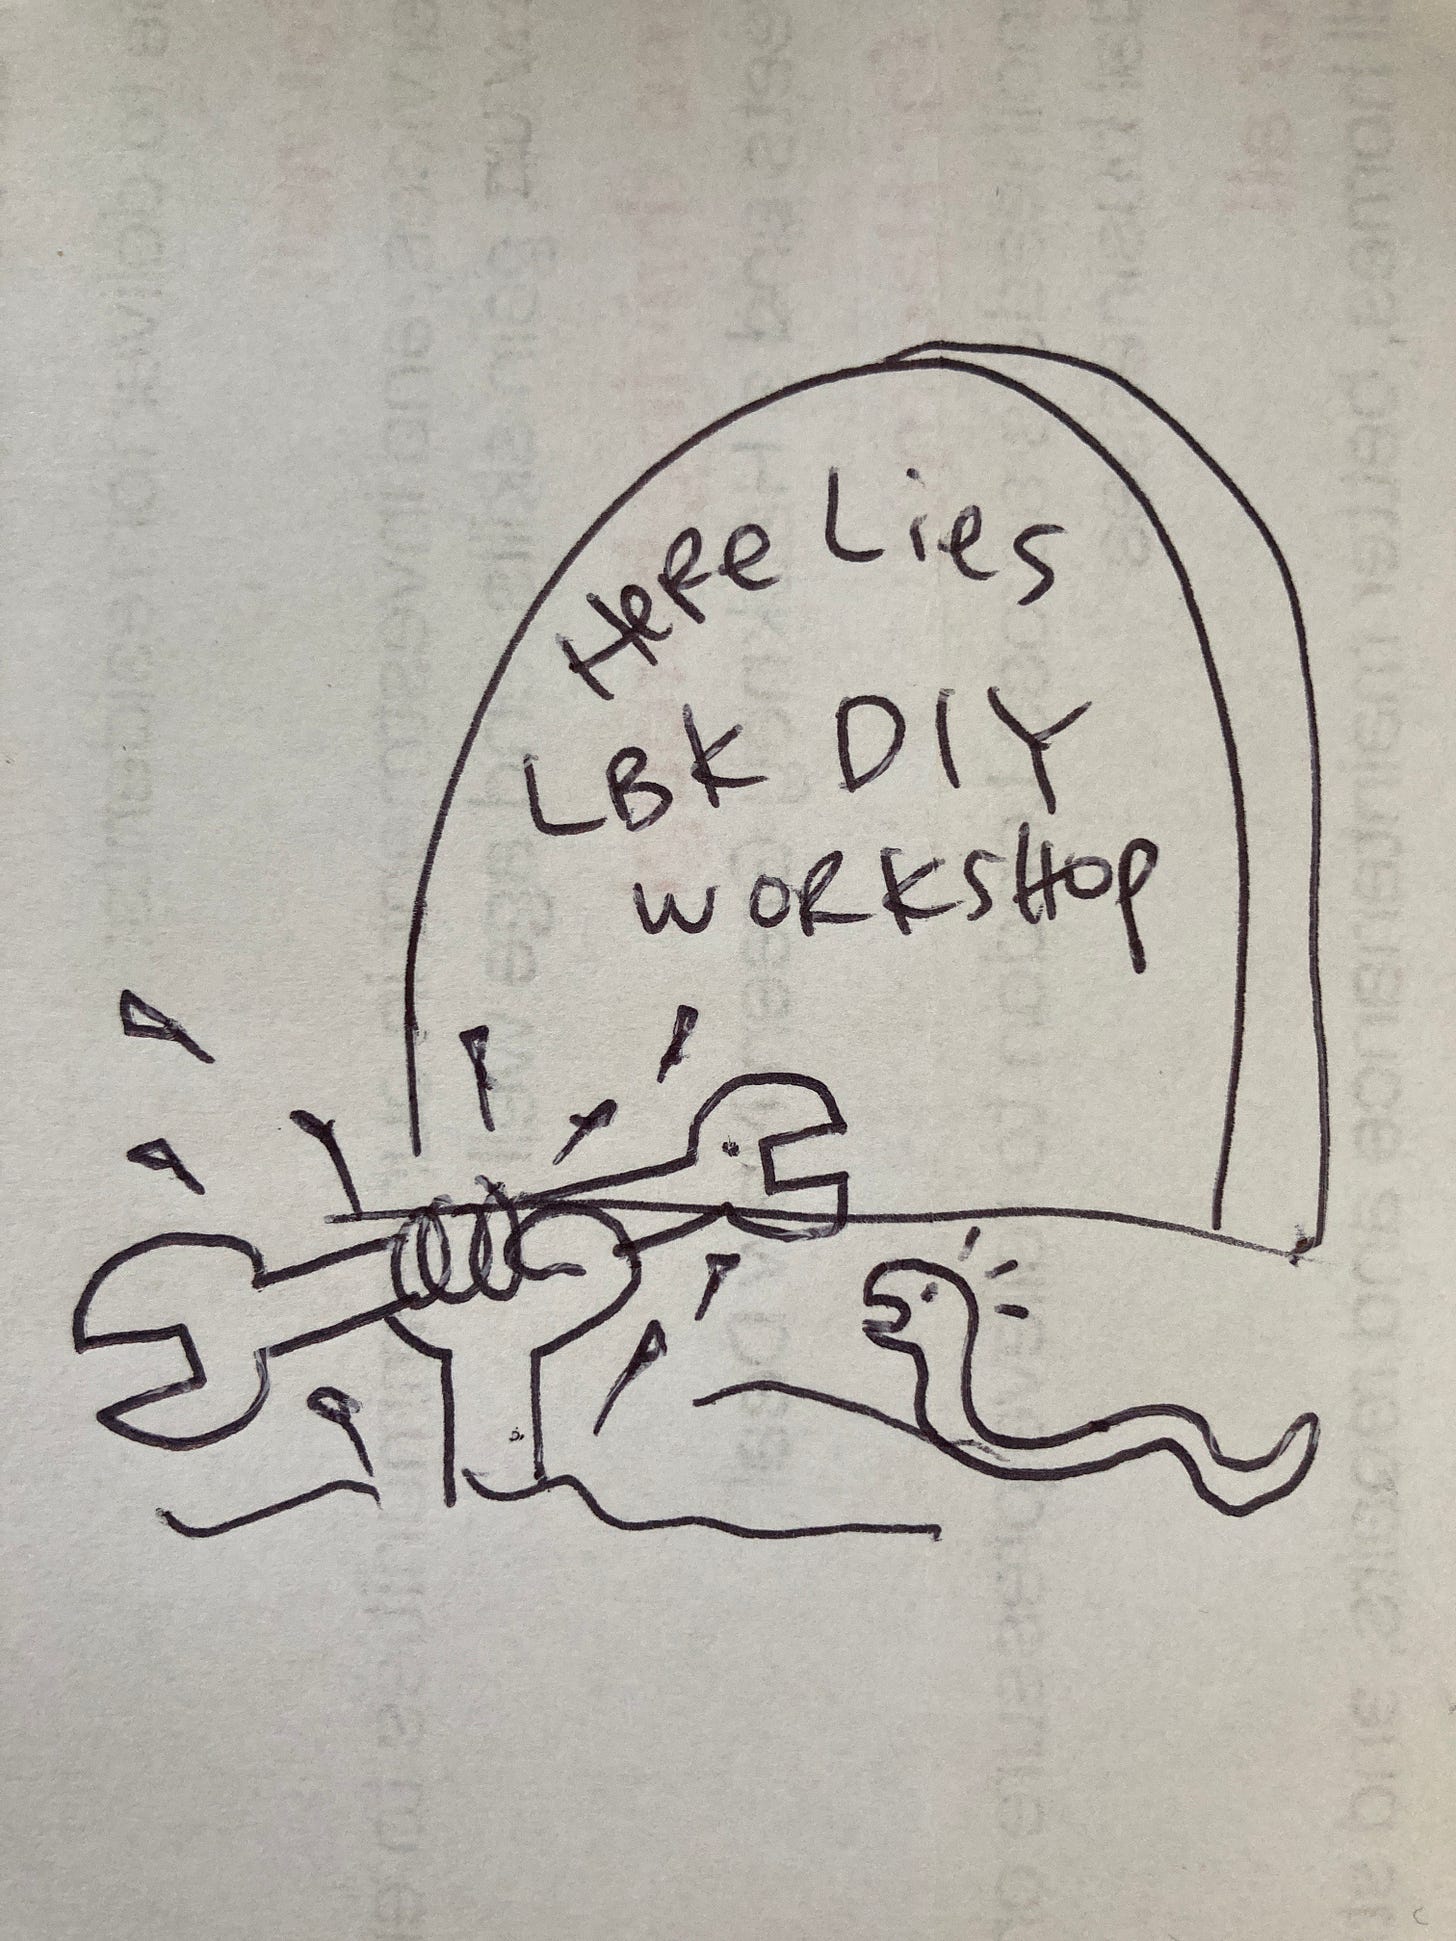 a worm is surprised at a fist holding a spanner bursting from a gravestone that says "here lies the LBK DIY workshop"